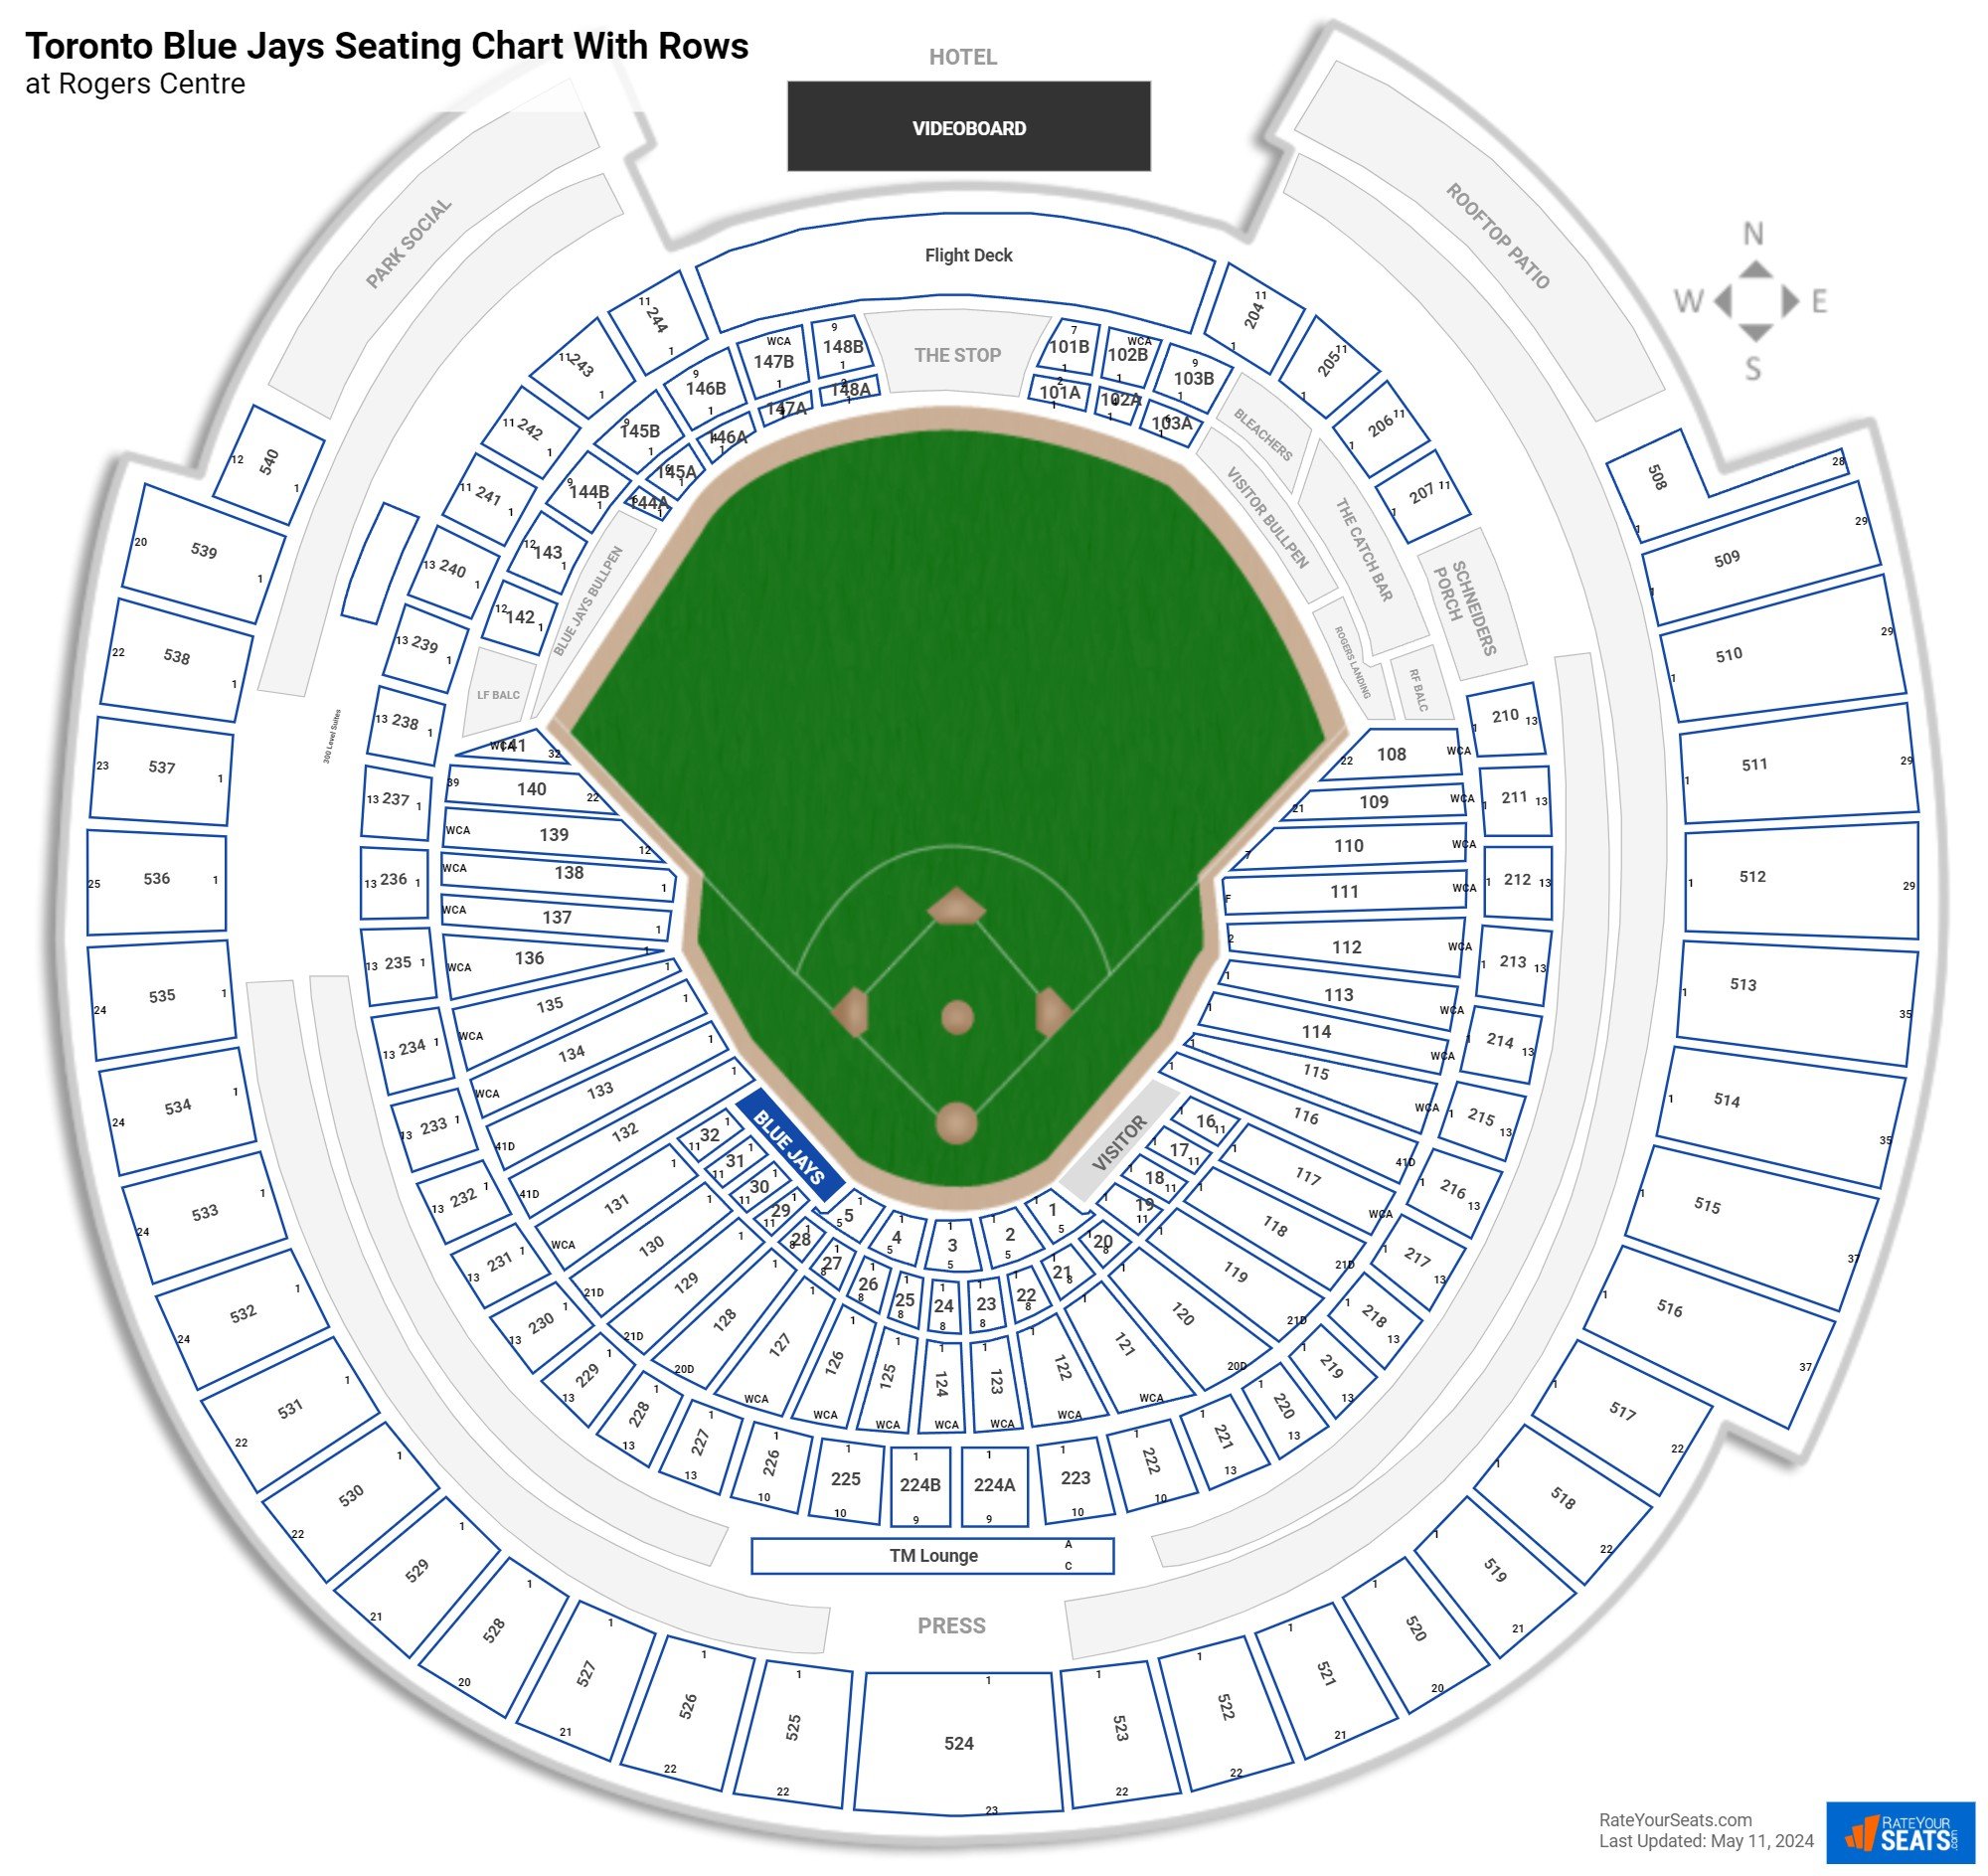 seating map of rogers centre        <h3 class=